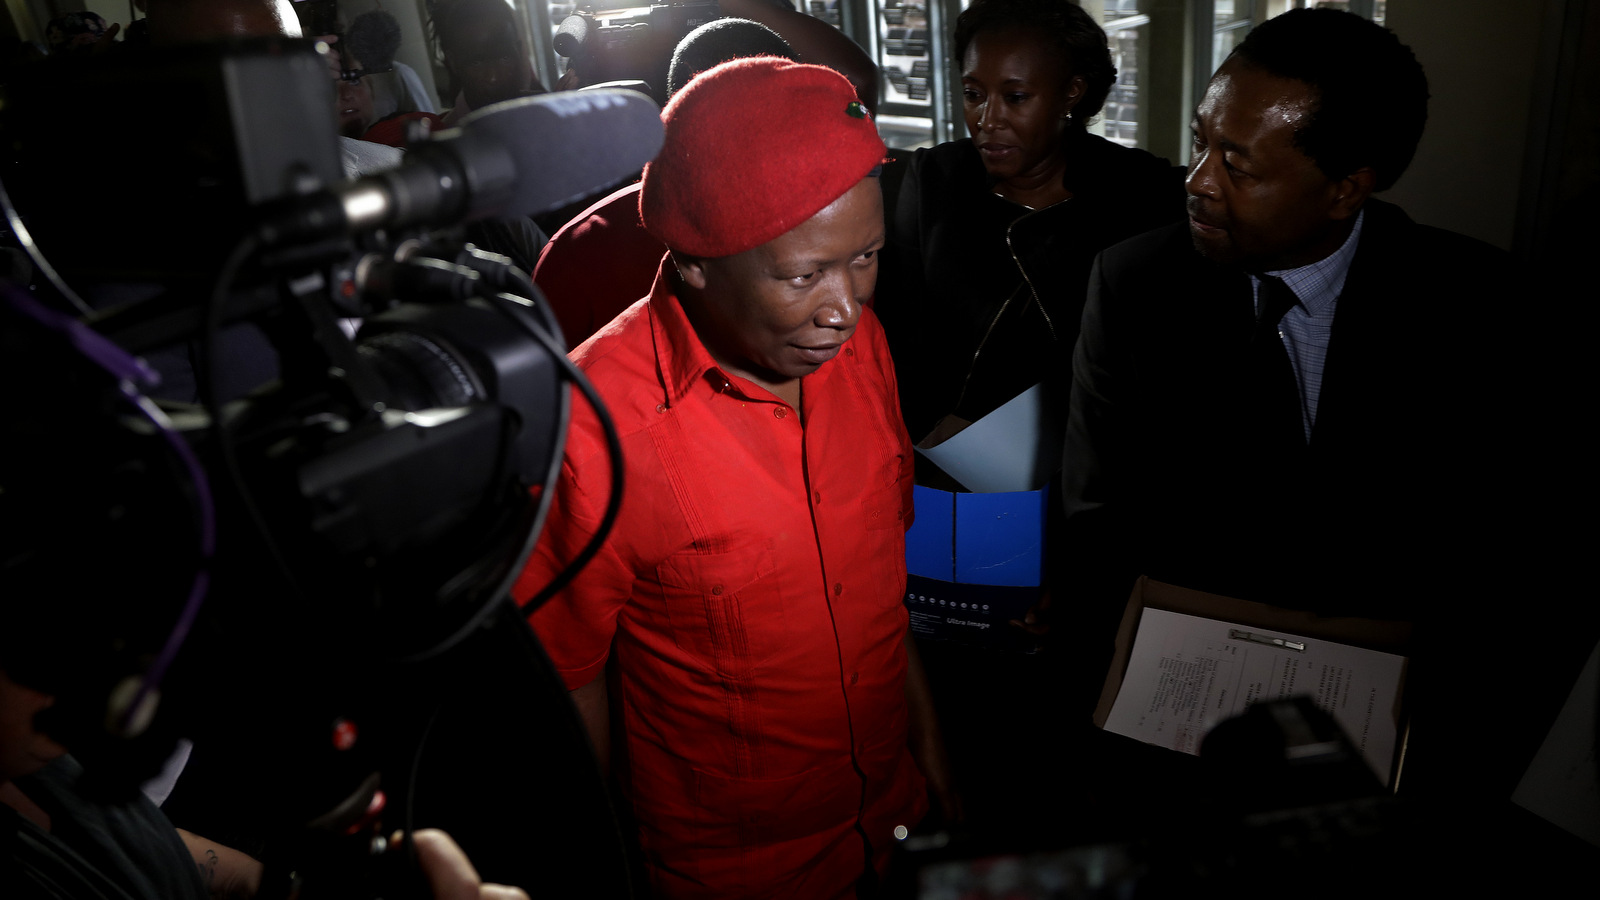 Economic Freedom Fighters leader, Julius Malema says the time for reconciliation is over. Now is the time of justice. Themba Hadebe | AP